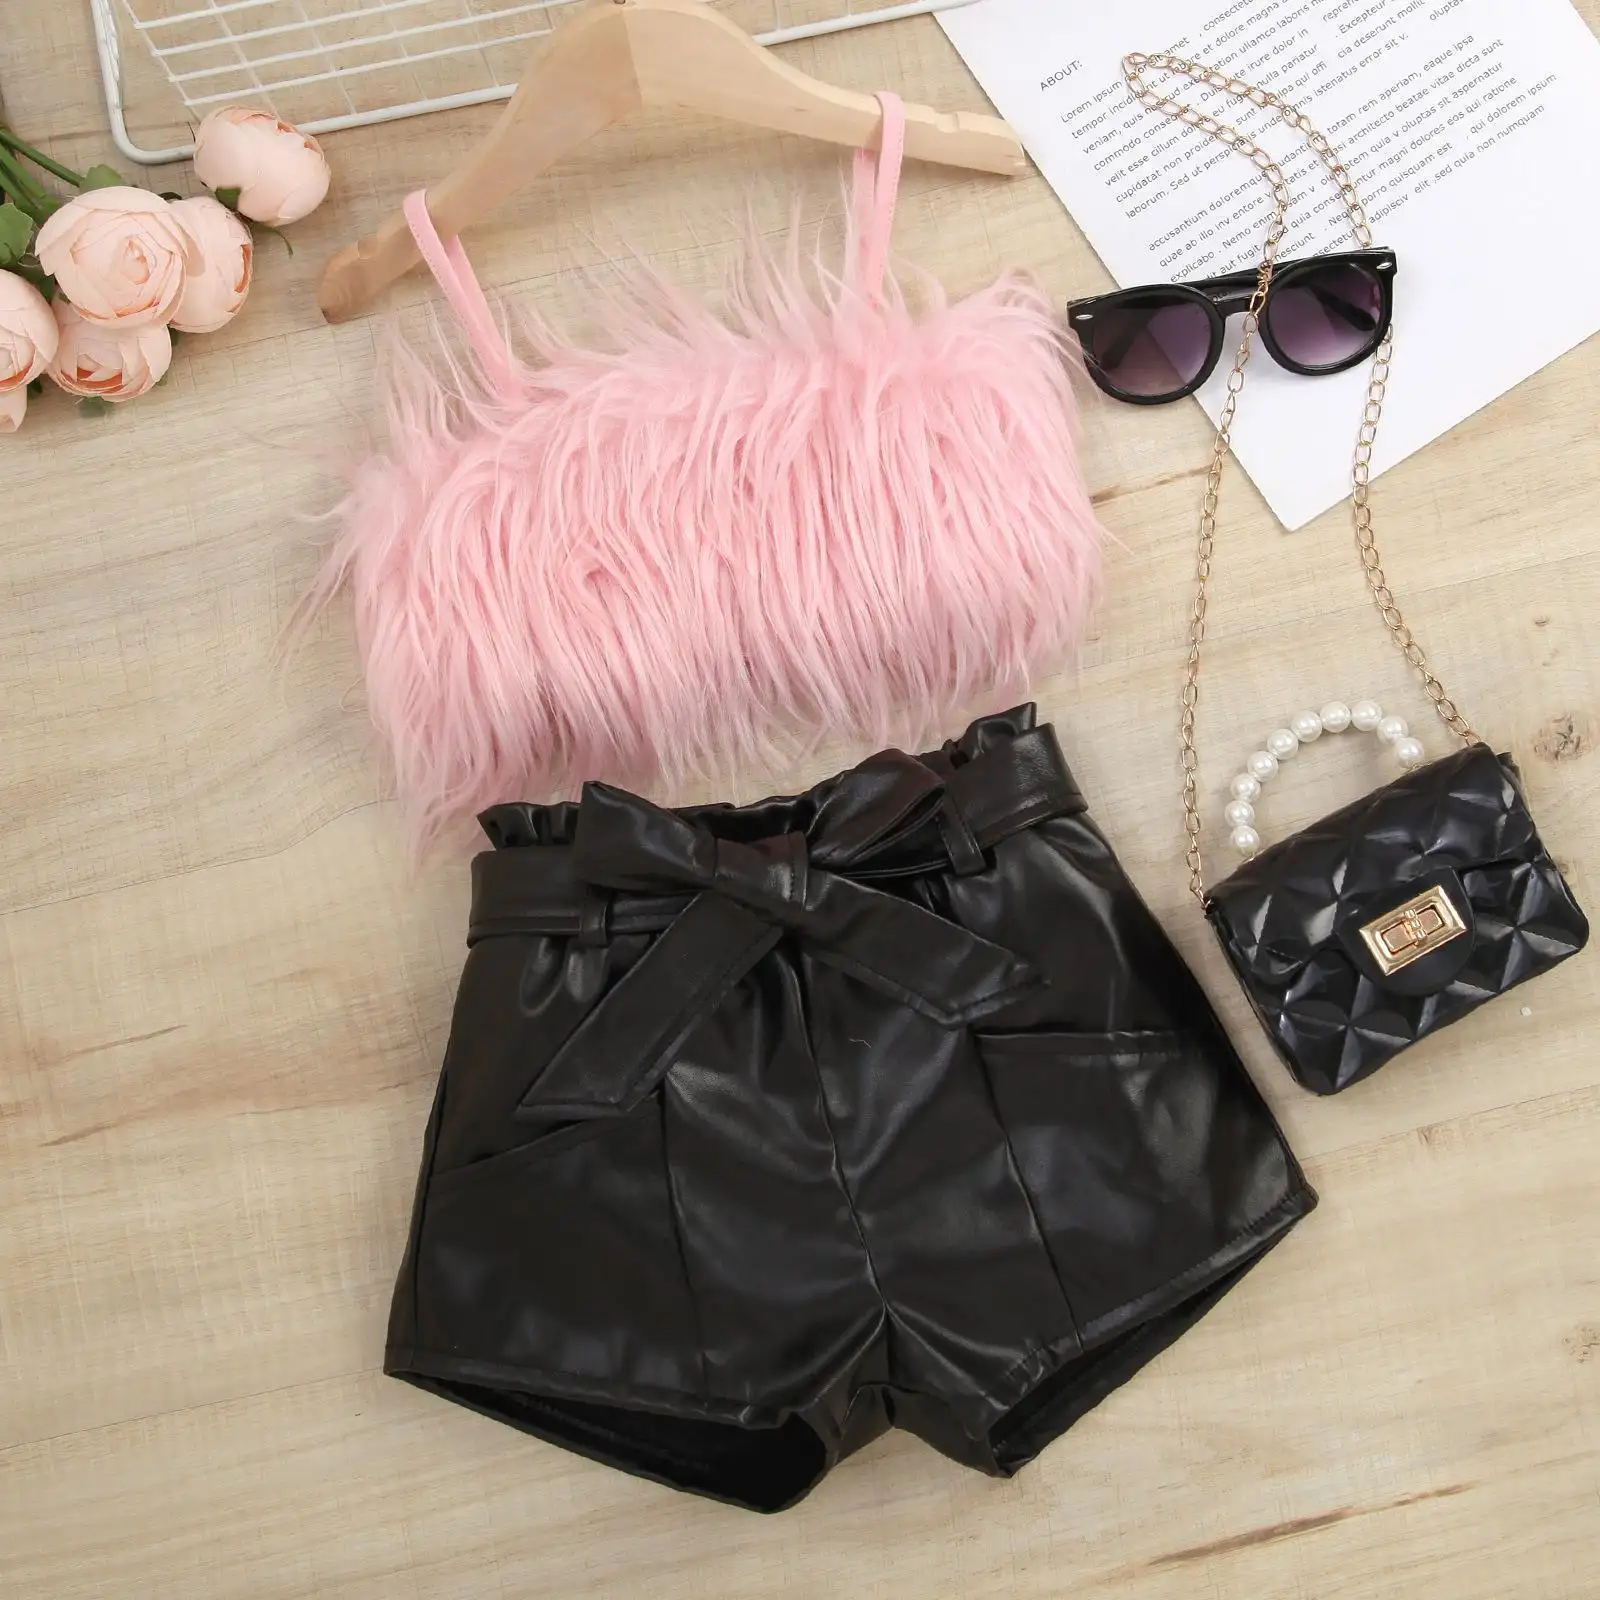 Newest Baby Girls Boutique Clothing 2 Pcs Sets Furry Suspender Top Leather Pants Kids Suit With Belt Children's Clothing